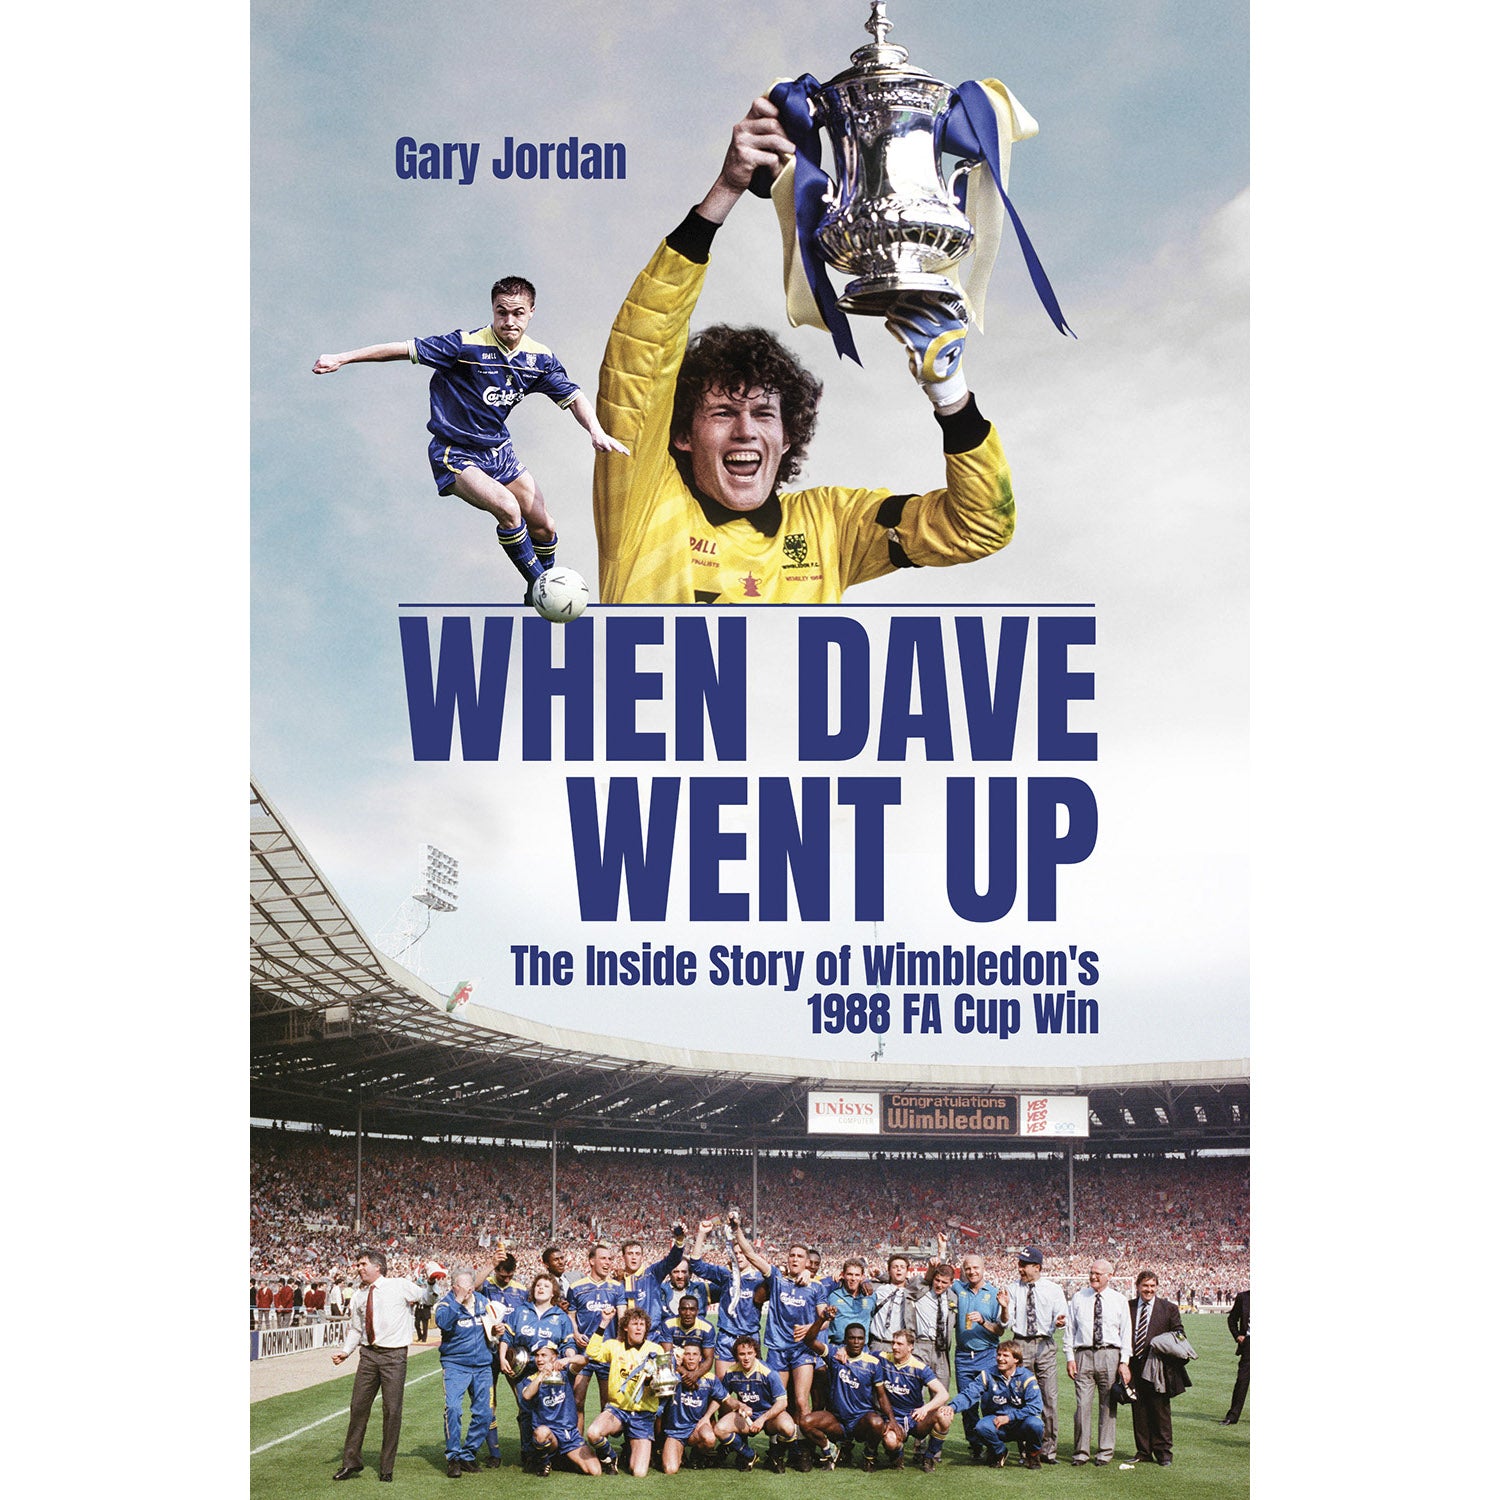 When Dave Went Up – The Inside Story of Wimbledon's 1988 F.A. Cup Win